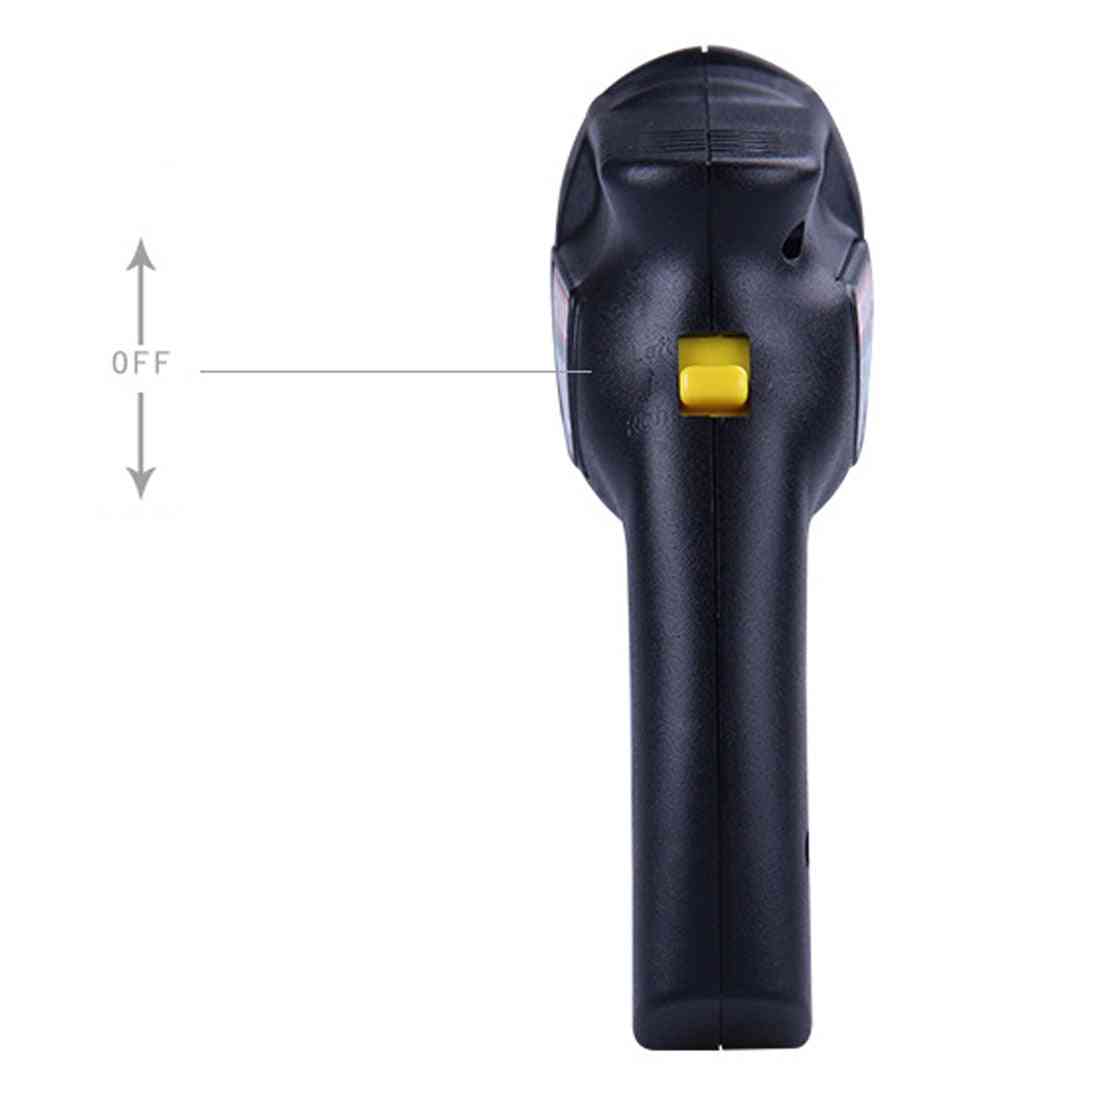 Children Plastic Simulation Maintenance Tool Repair Electric Drill Tool Early Development Education For